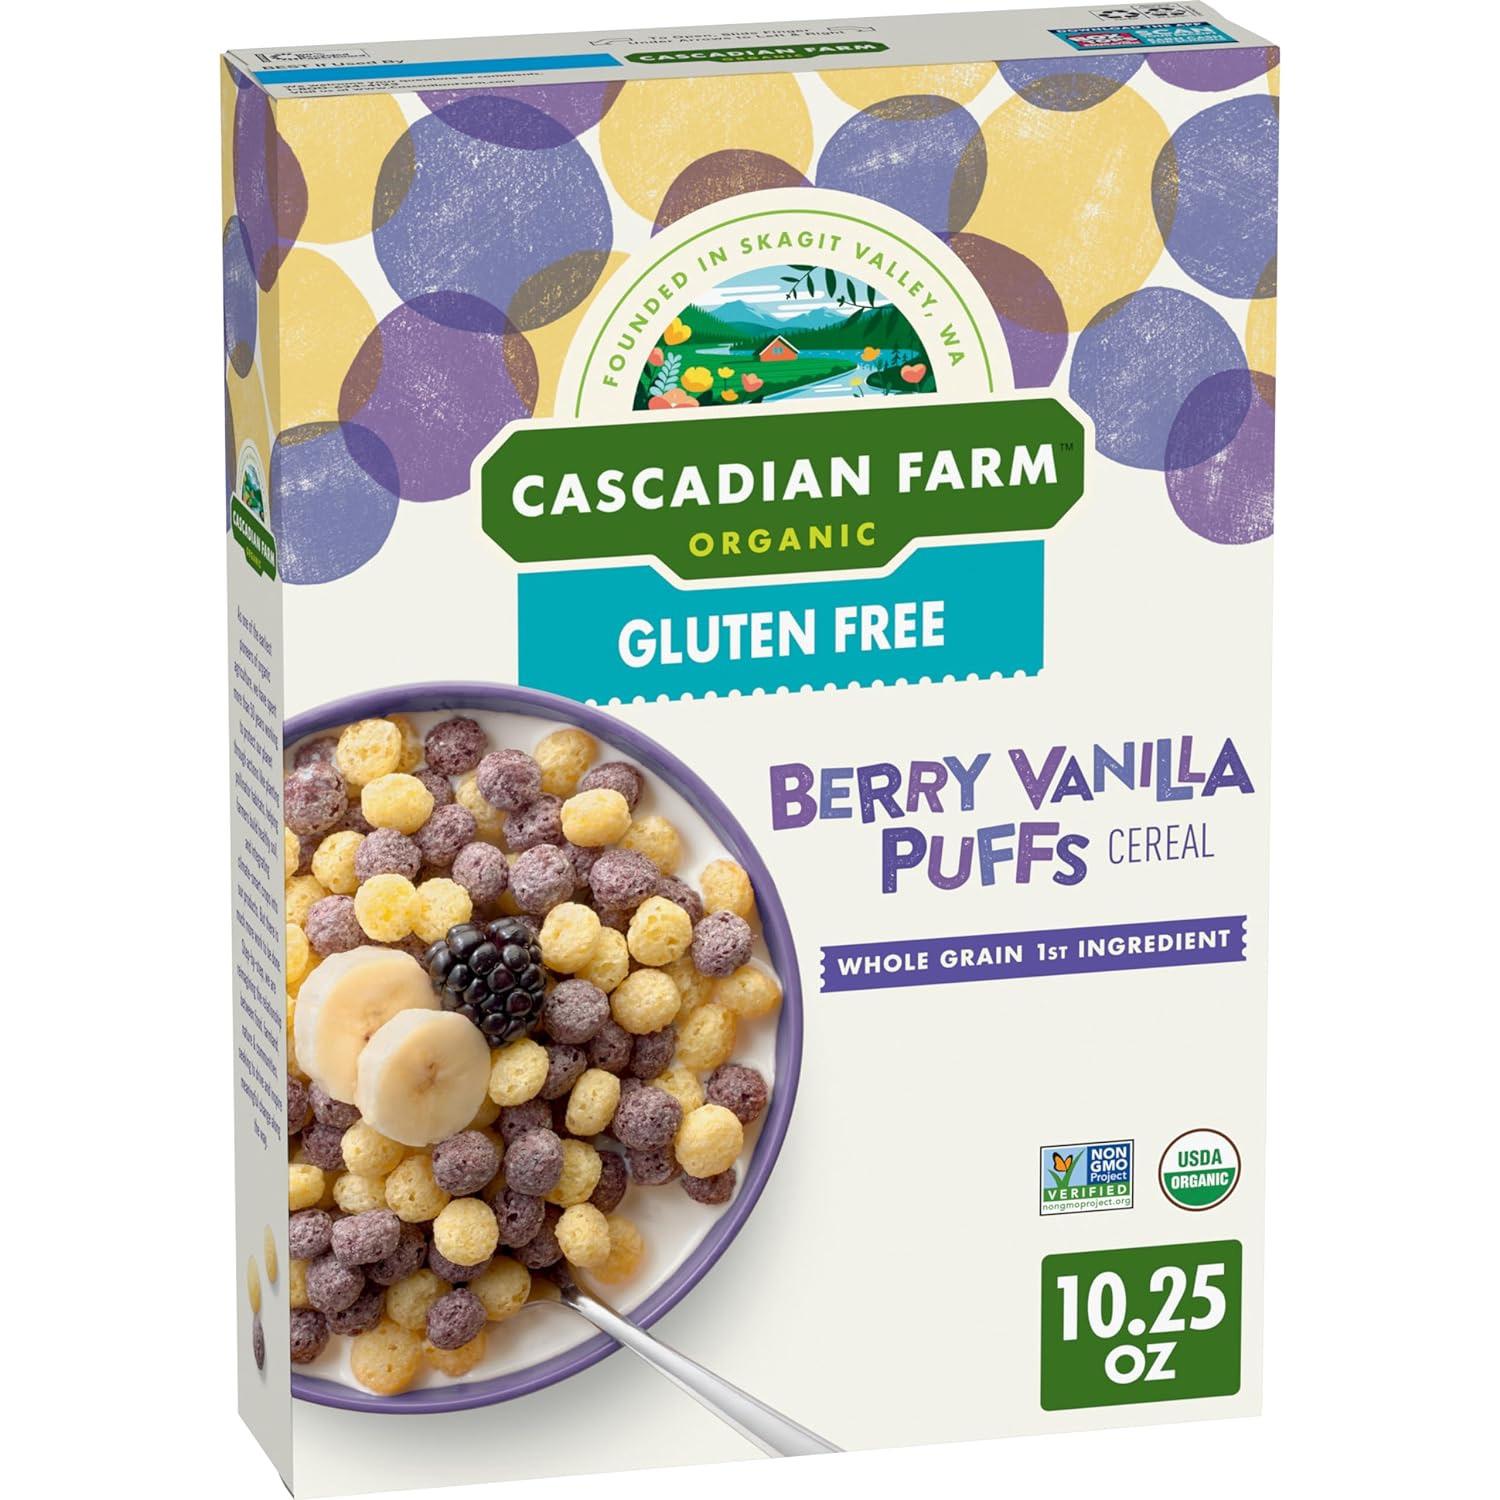 Cascadian Farm Organic Berry Vanilla Puffs Cereal for $2.81